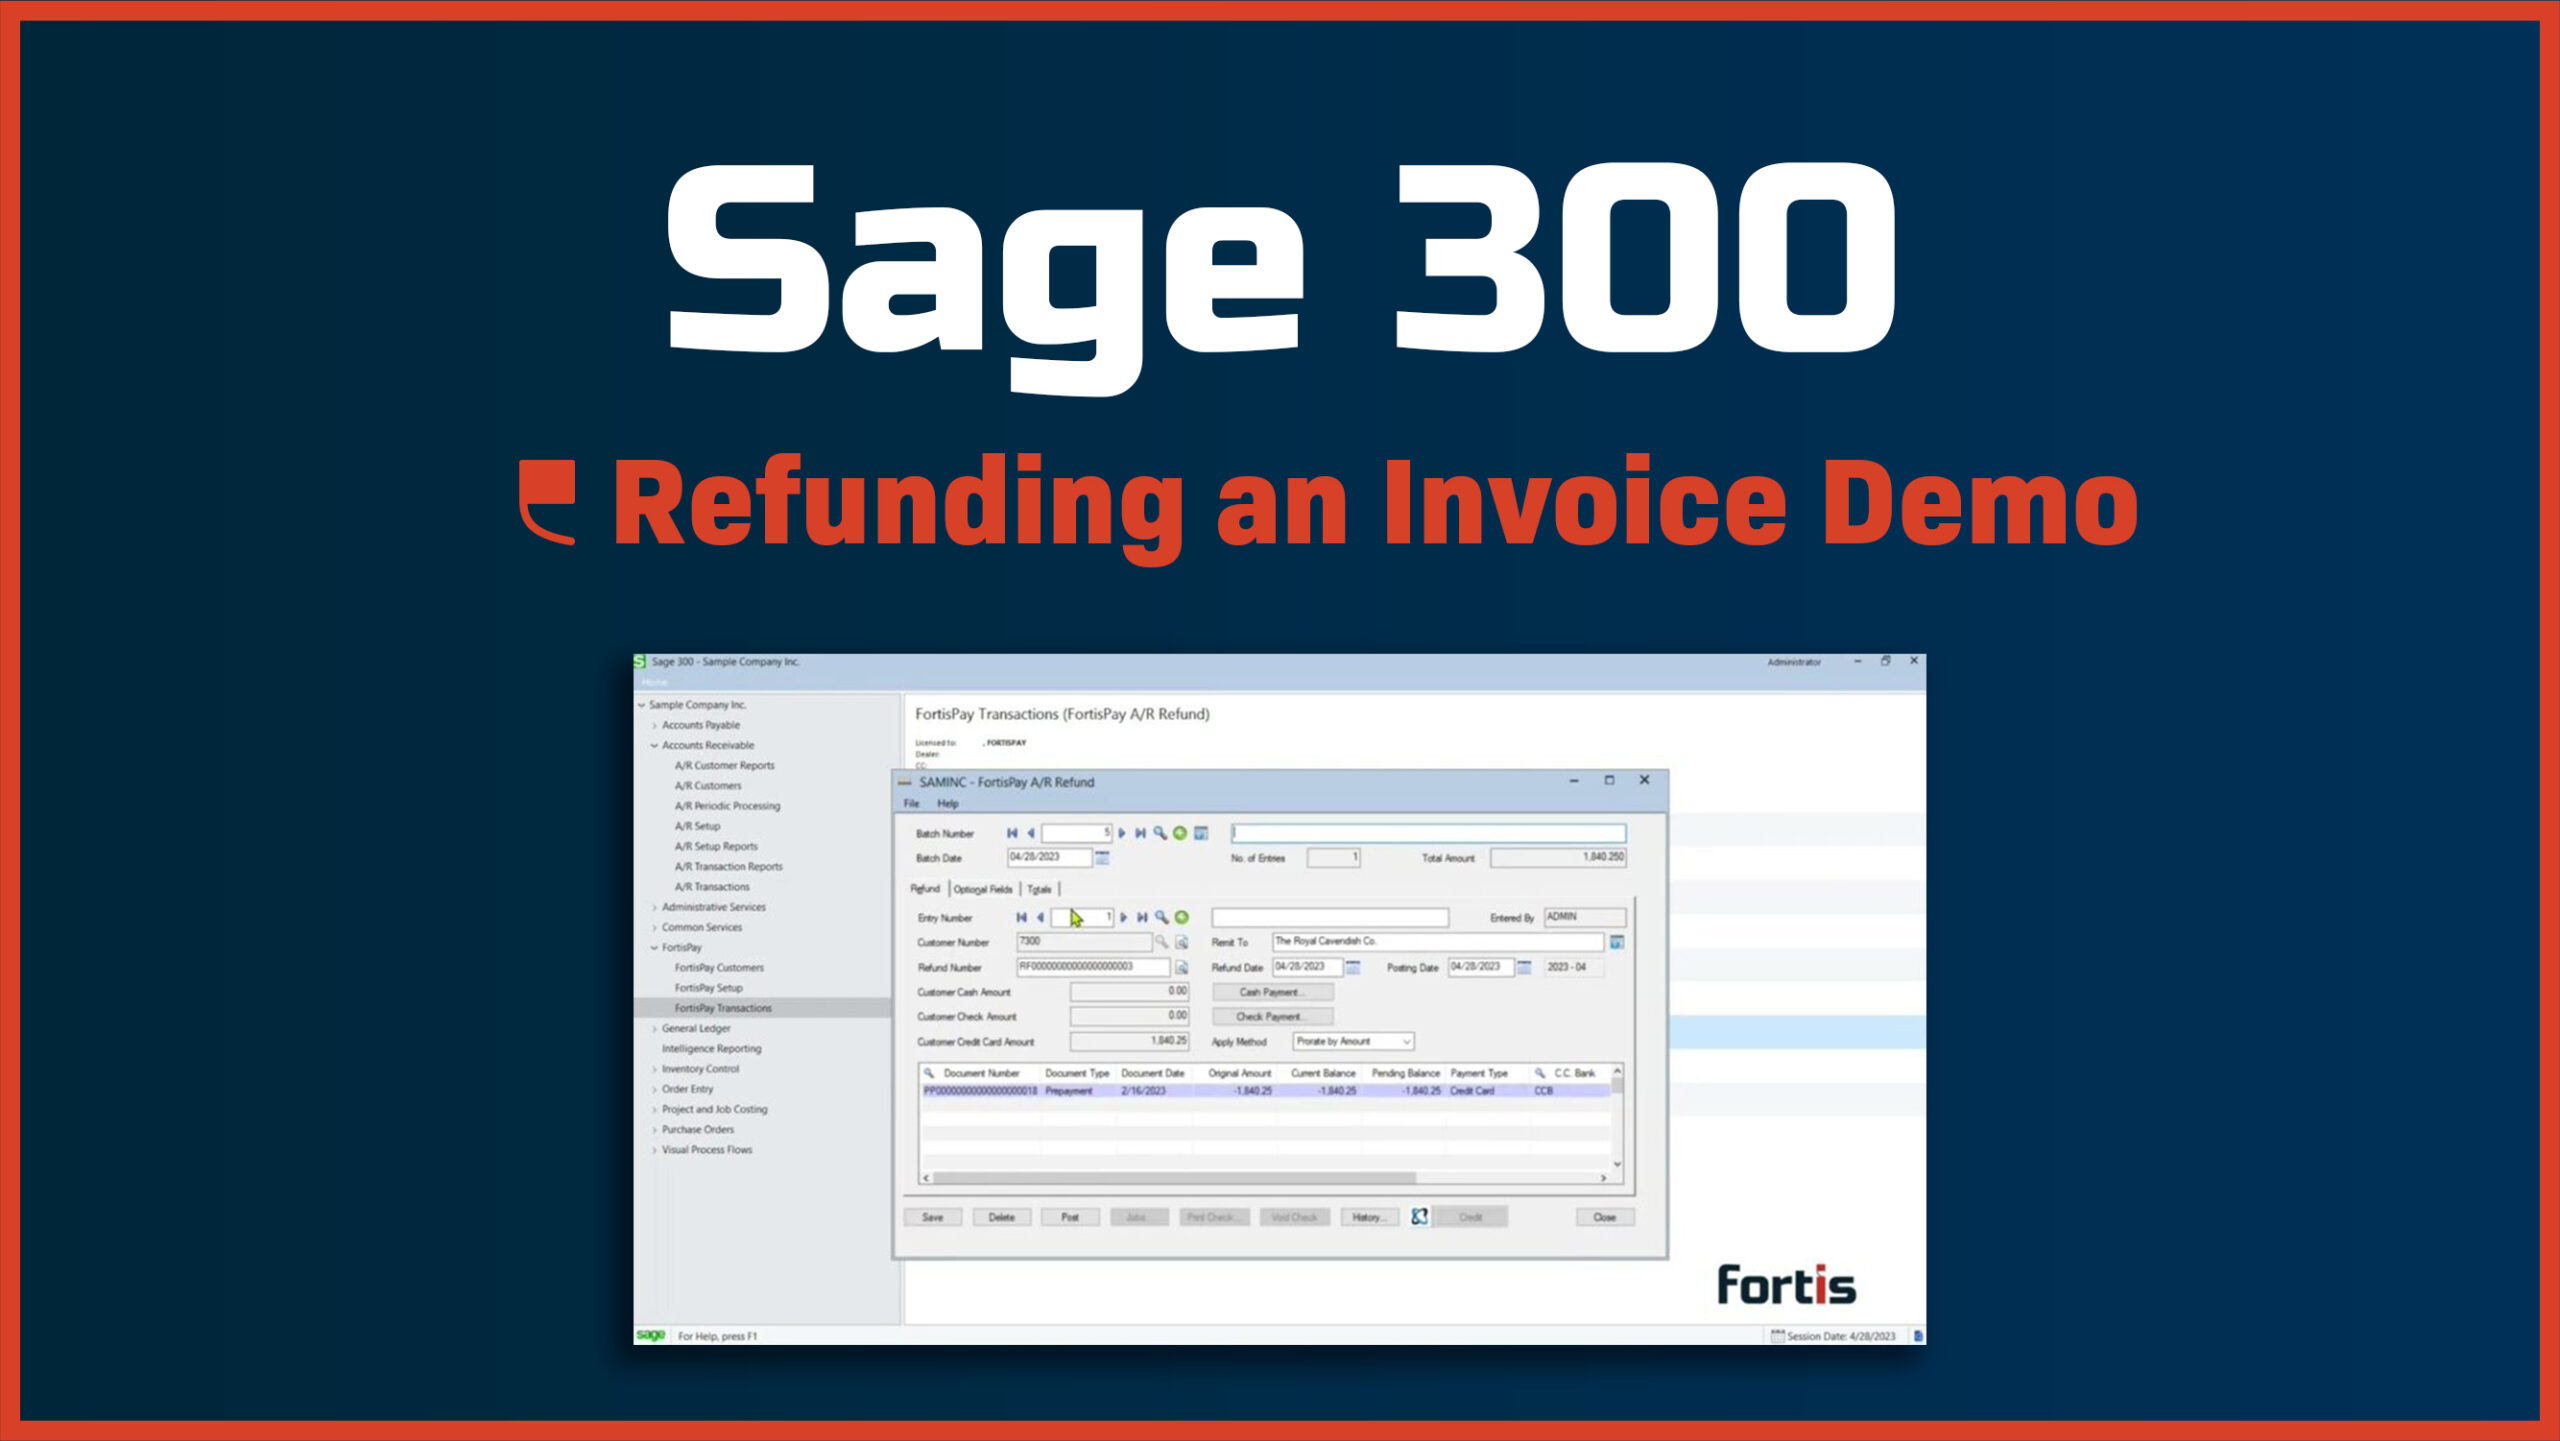 Sage 300 – Refunding an Invoice - Featured Image